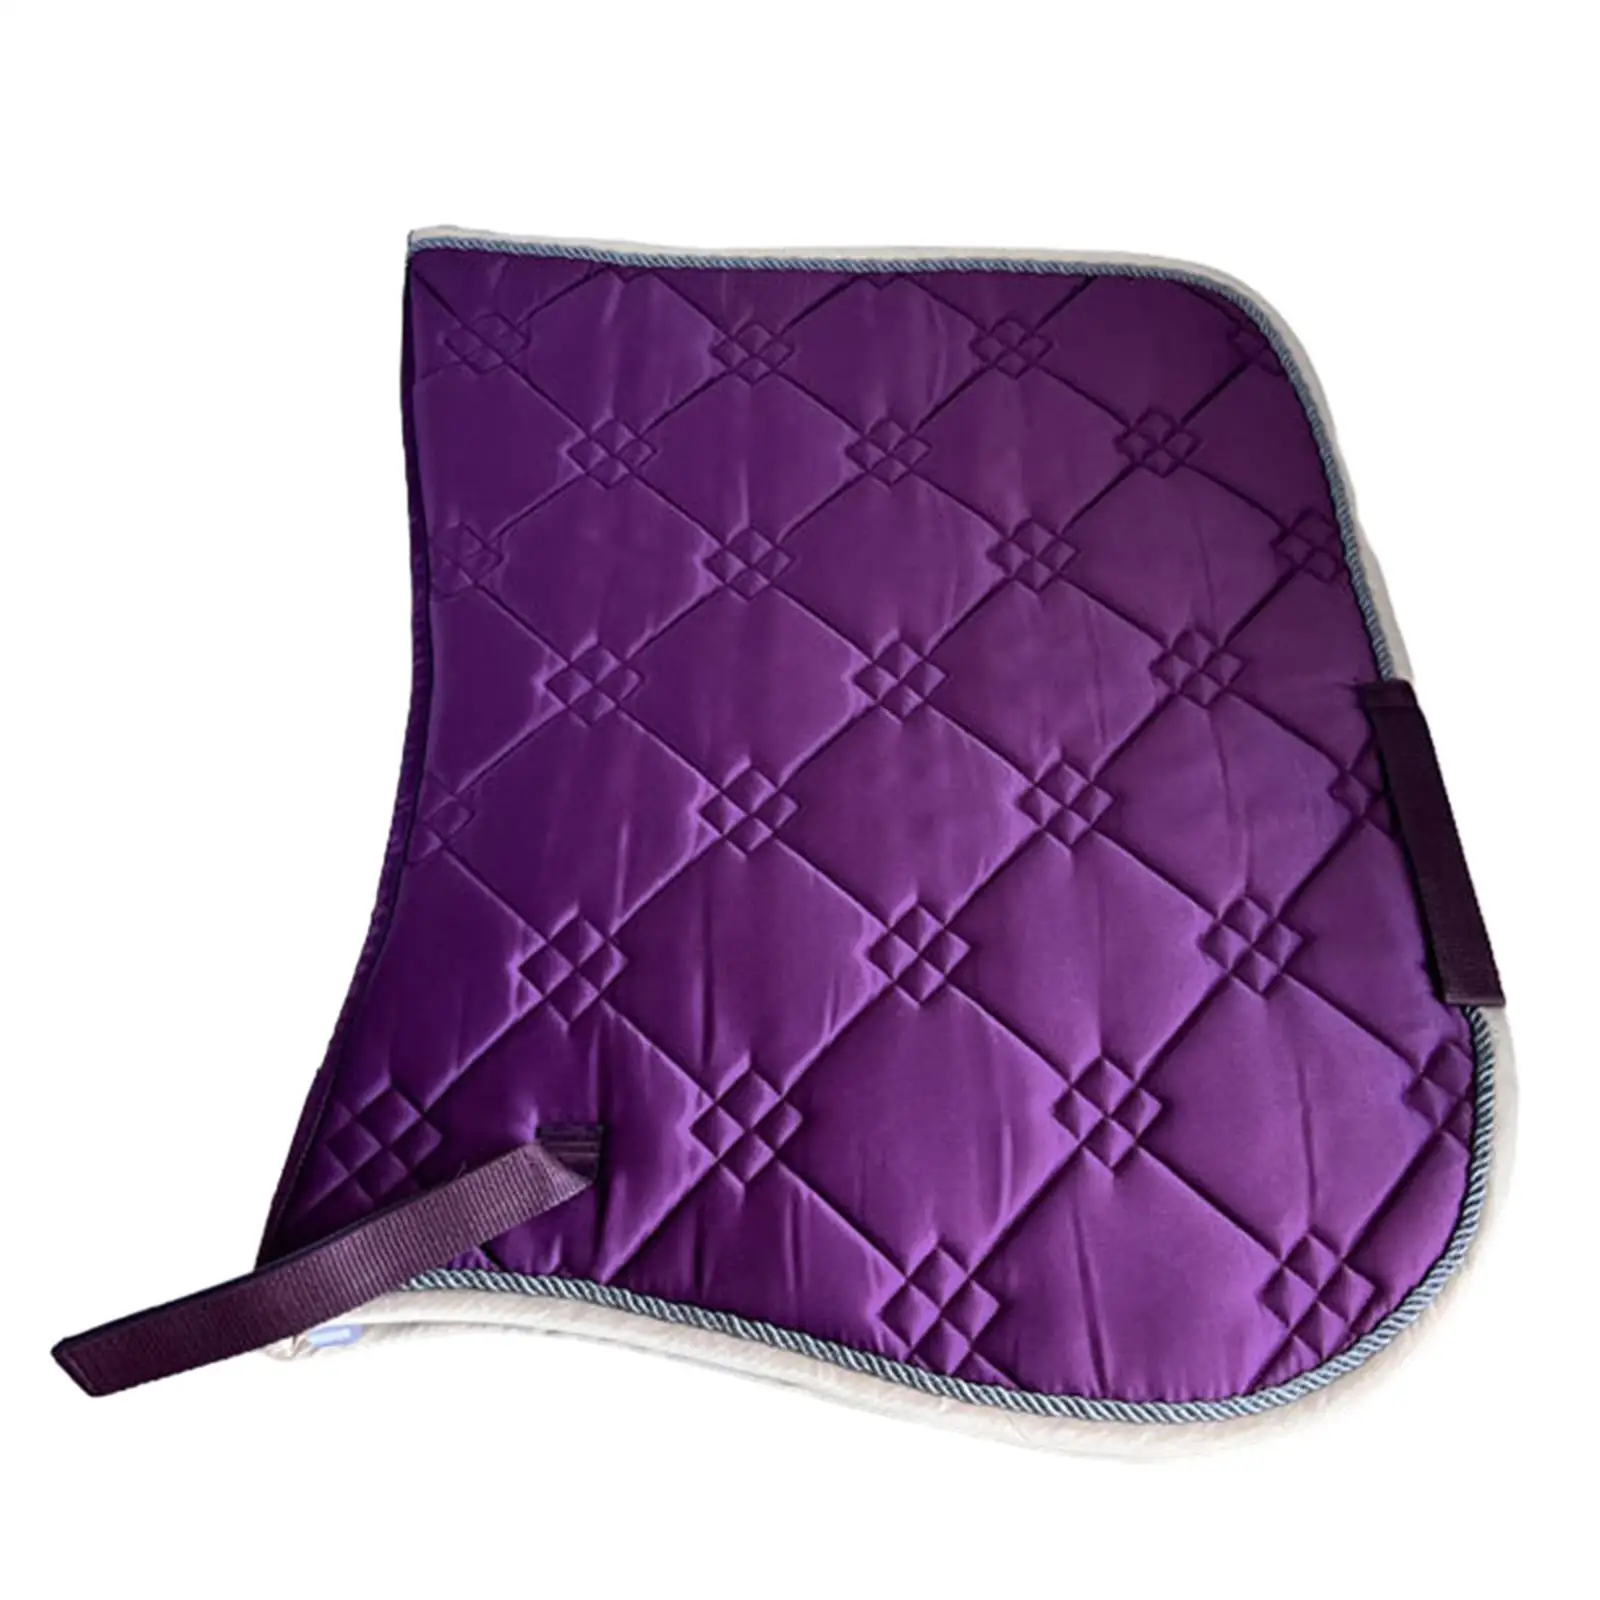 Horse Saddle Pad Equestrian Riding Equipment Breathable Protection Sports Padding Accessories Portable Saddle Shock Pad